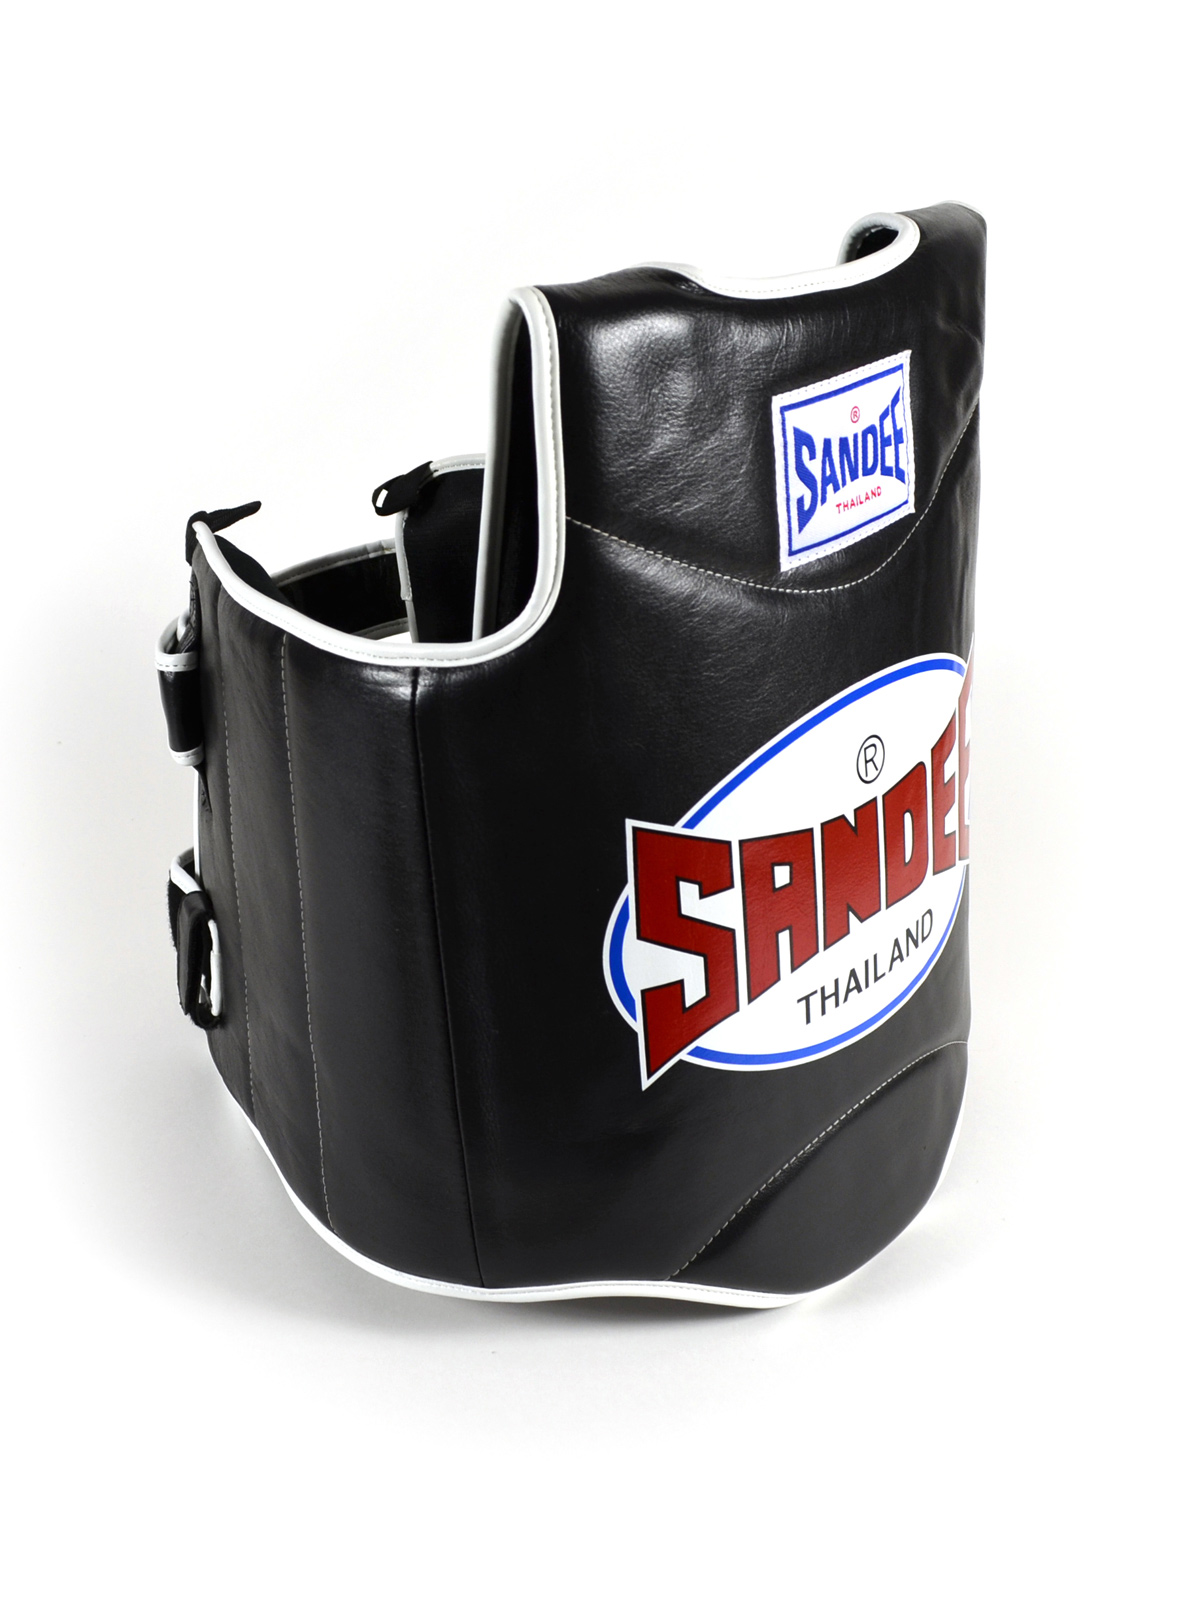 Sandee Body Shield Protection Muay Thai Boxing Synthetic Leather Black White